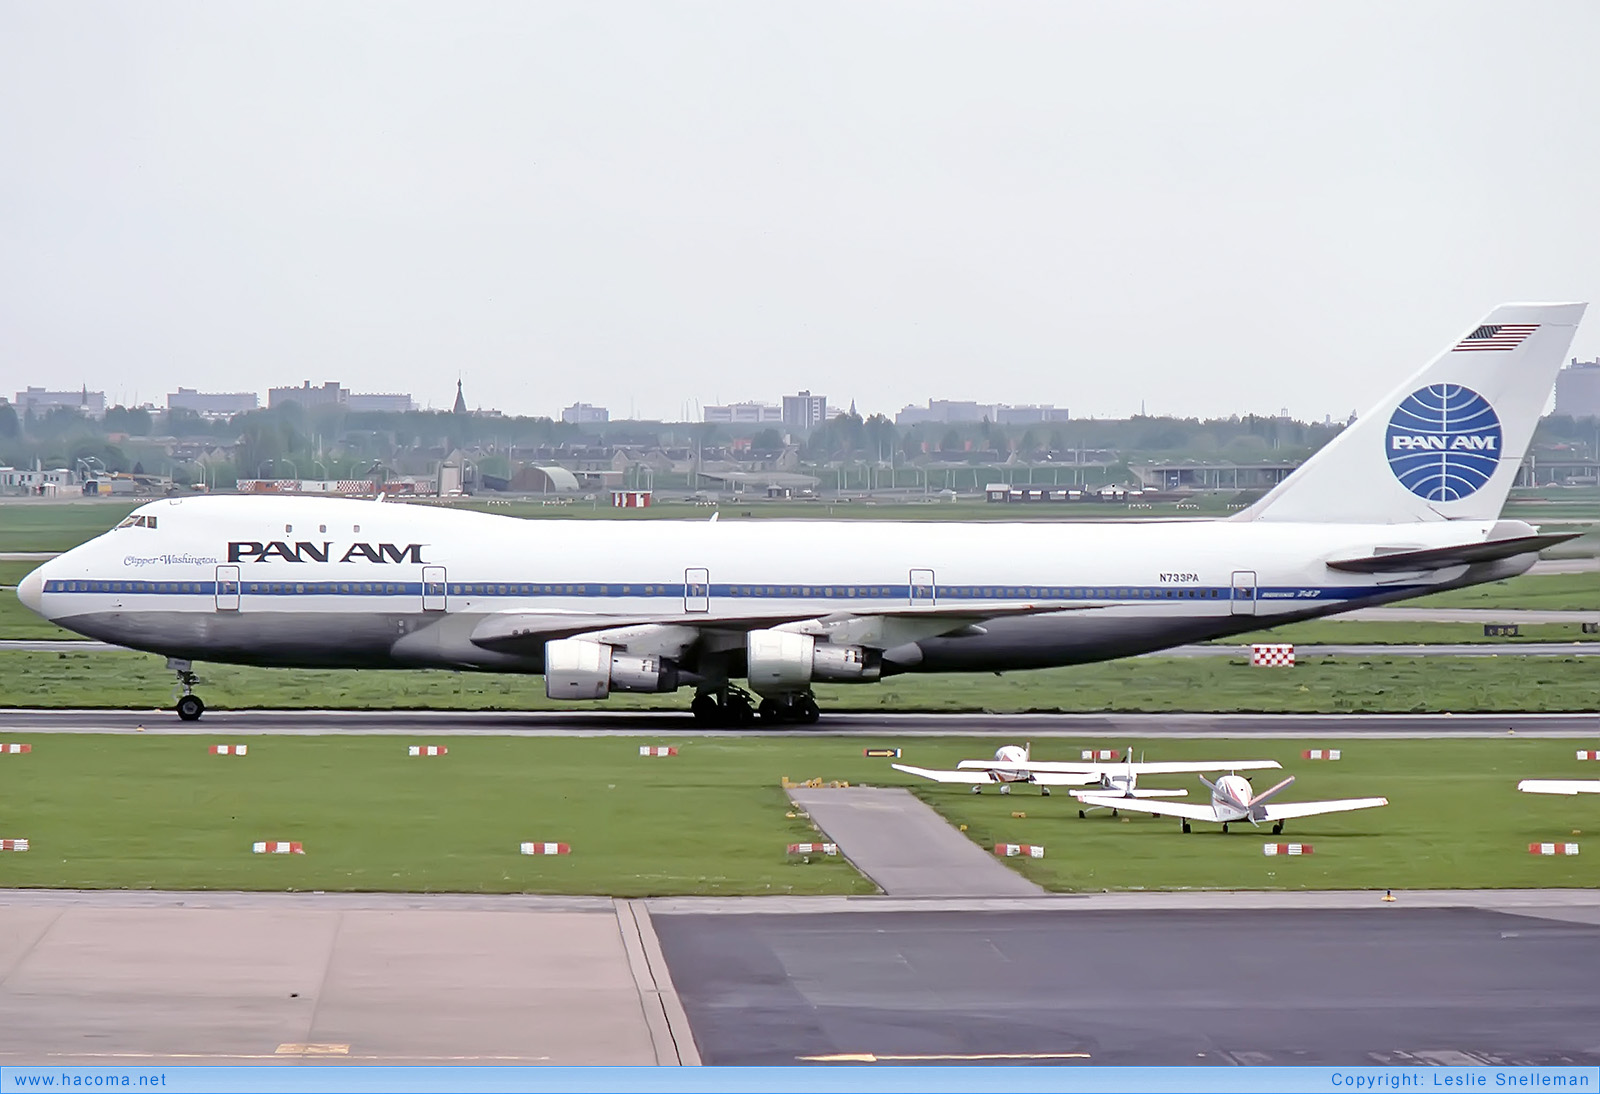 Foto von N733PA - Pan Am Clipper Young America / Constitution / Washington / Pride of the Sea / Air Express / Moscow Express - Flughafen Schiphol - 21.05.1977